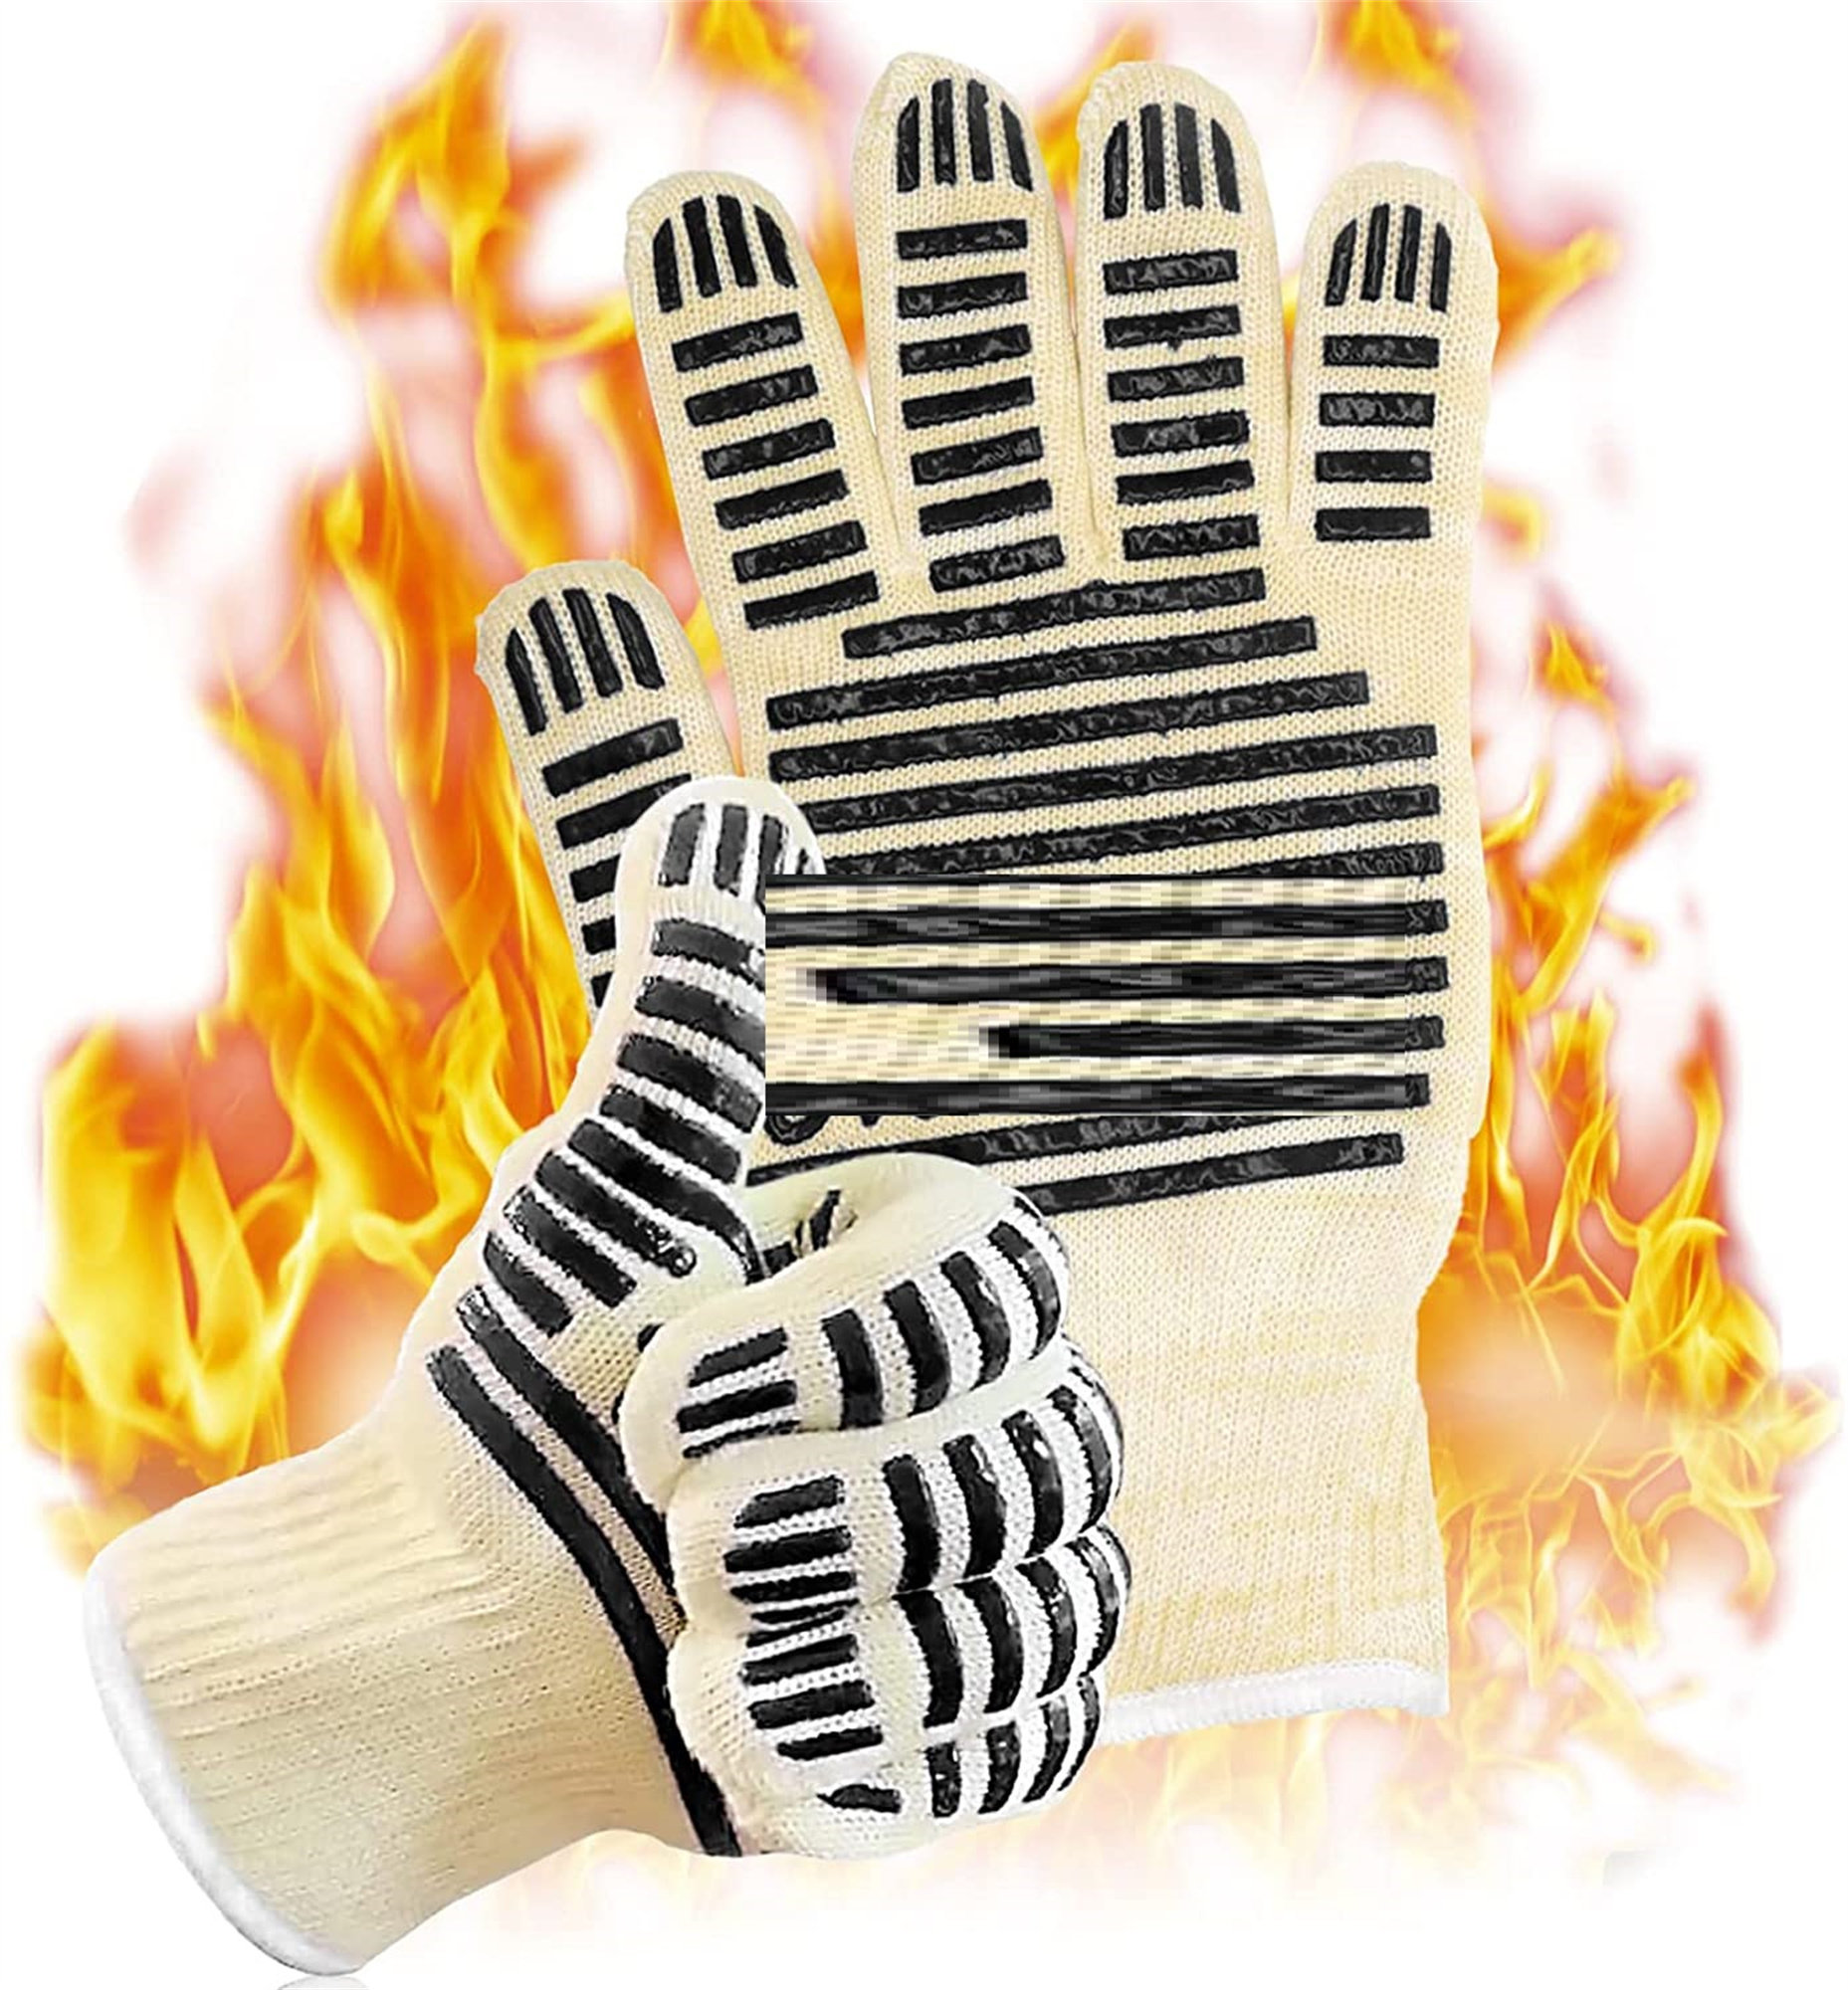 The Official Ove Hot Surface Handler Glove 